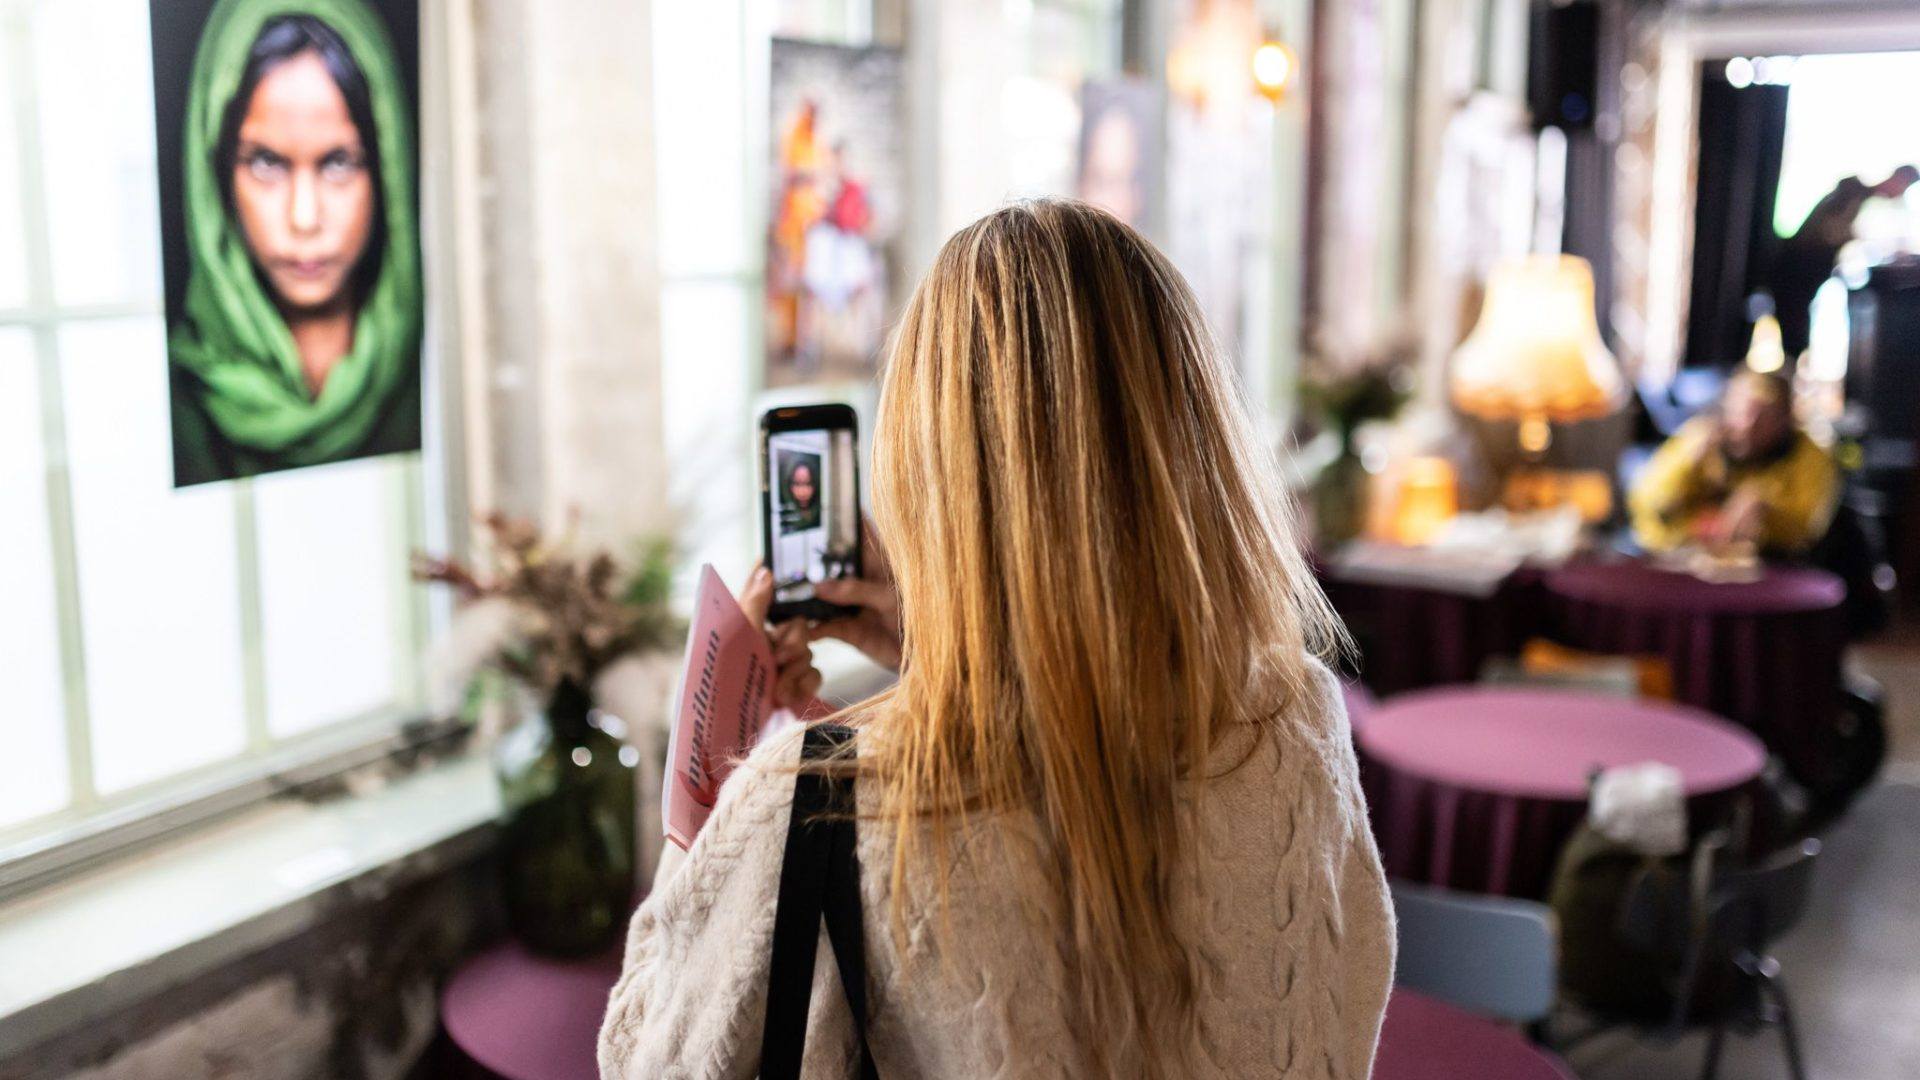 A blond woman takes a picture of a photo exhibition.